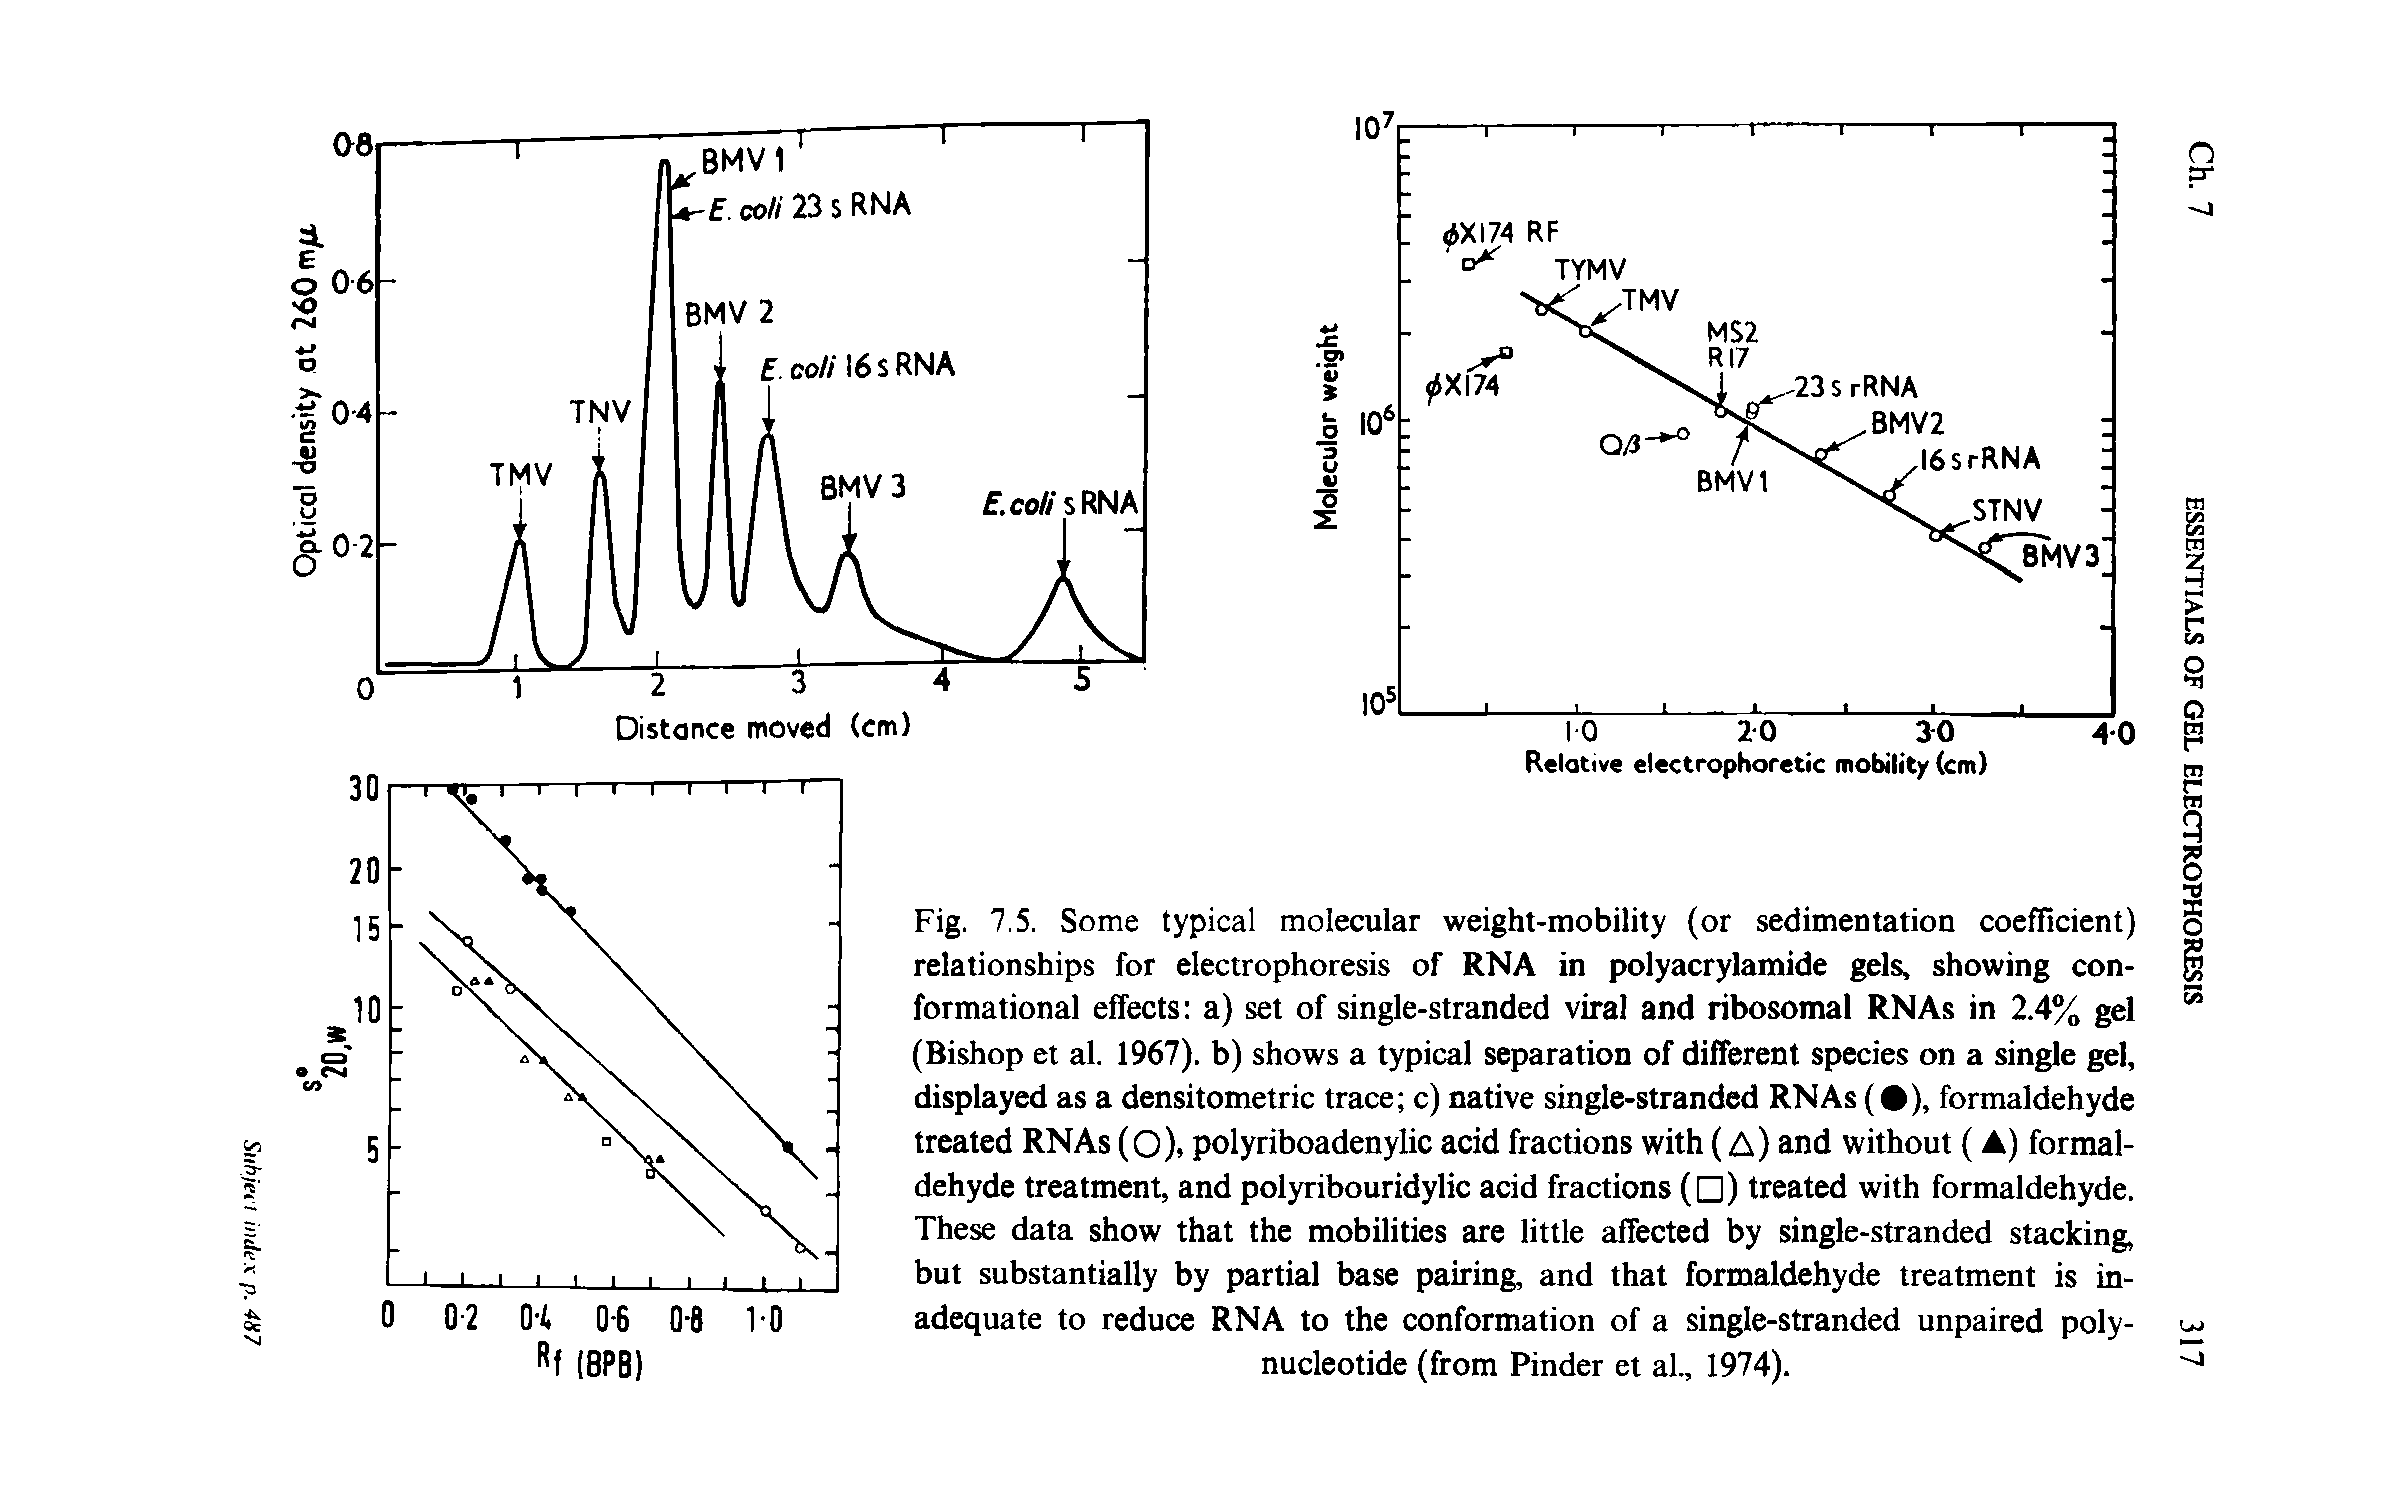 Fig. 7.5. Some typical molecular weiglit-mobility (or sedimentation coefficient) relationstiips for electrophoresis of RNA in polyacrylamide gels, showing conformational effects a) set of single-stranded viral and ribosomal RNAs in 2.4% gel (Bishop et al. 1967). b) shows a typical separation of different species on a single gel, displayed as a densitometric trace c) native single-stranded RNAs ( ), formaldehyde treated RNAs (O). polyriboadenylic acid fractions with (A) and without (A) formaldehyde treatment, and polyribouridylic acid fractions ( ) treated with formaldehyde. These data show that the mobilities are little affected by single-stranded stacking, but substantially by partial base pairing, and that formaldehyde treatment is inadequate to reduce RNA to the conformation of a single-stranded unpaired polynucleotide (from Finder et al., 1974).